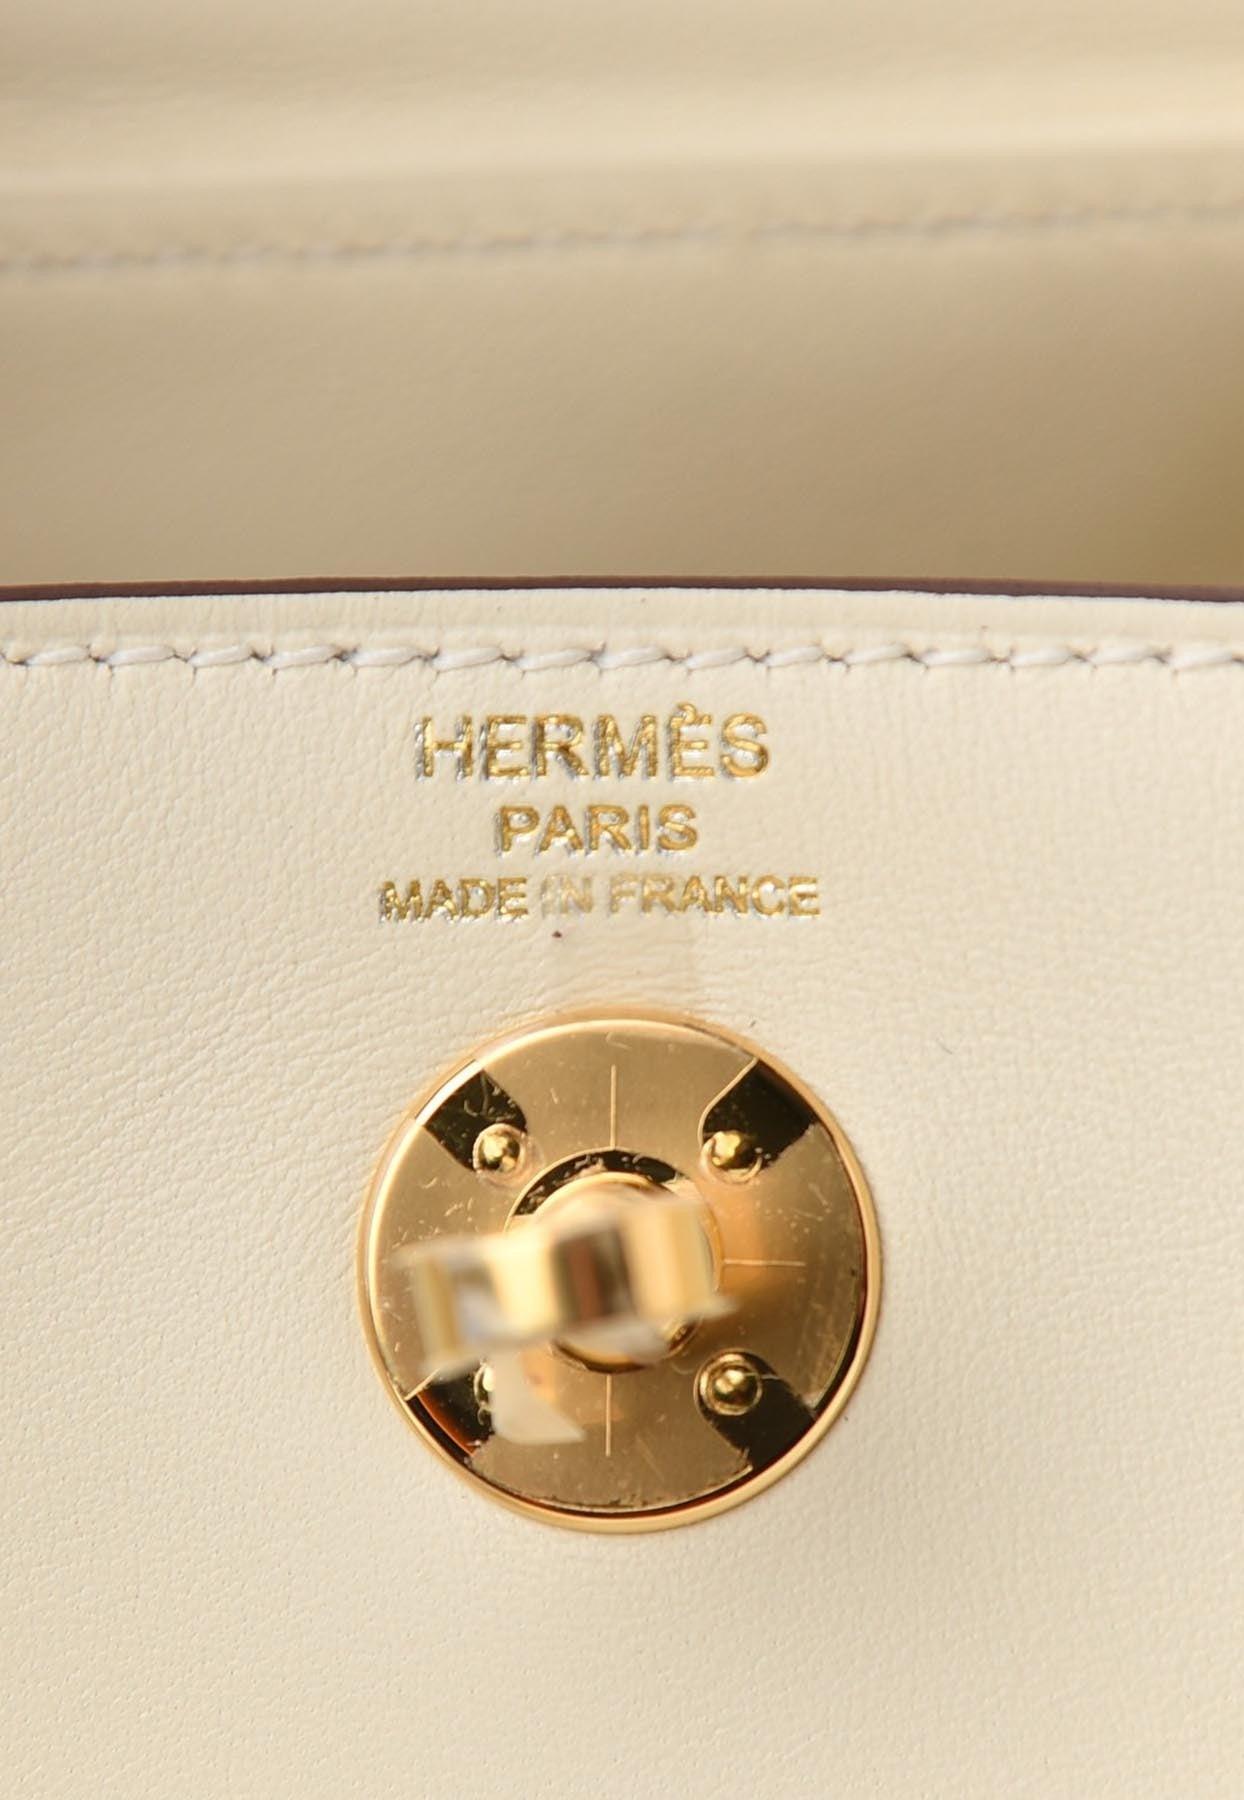 Hermès Mini Lindy 20 In Nata Swift Leather With Gold Hardware in White